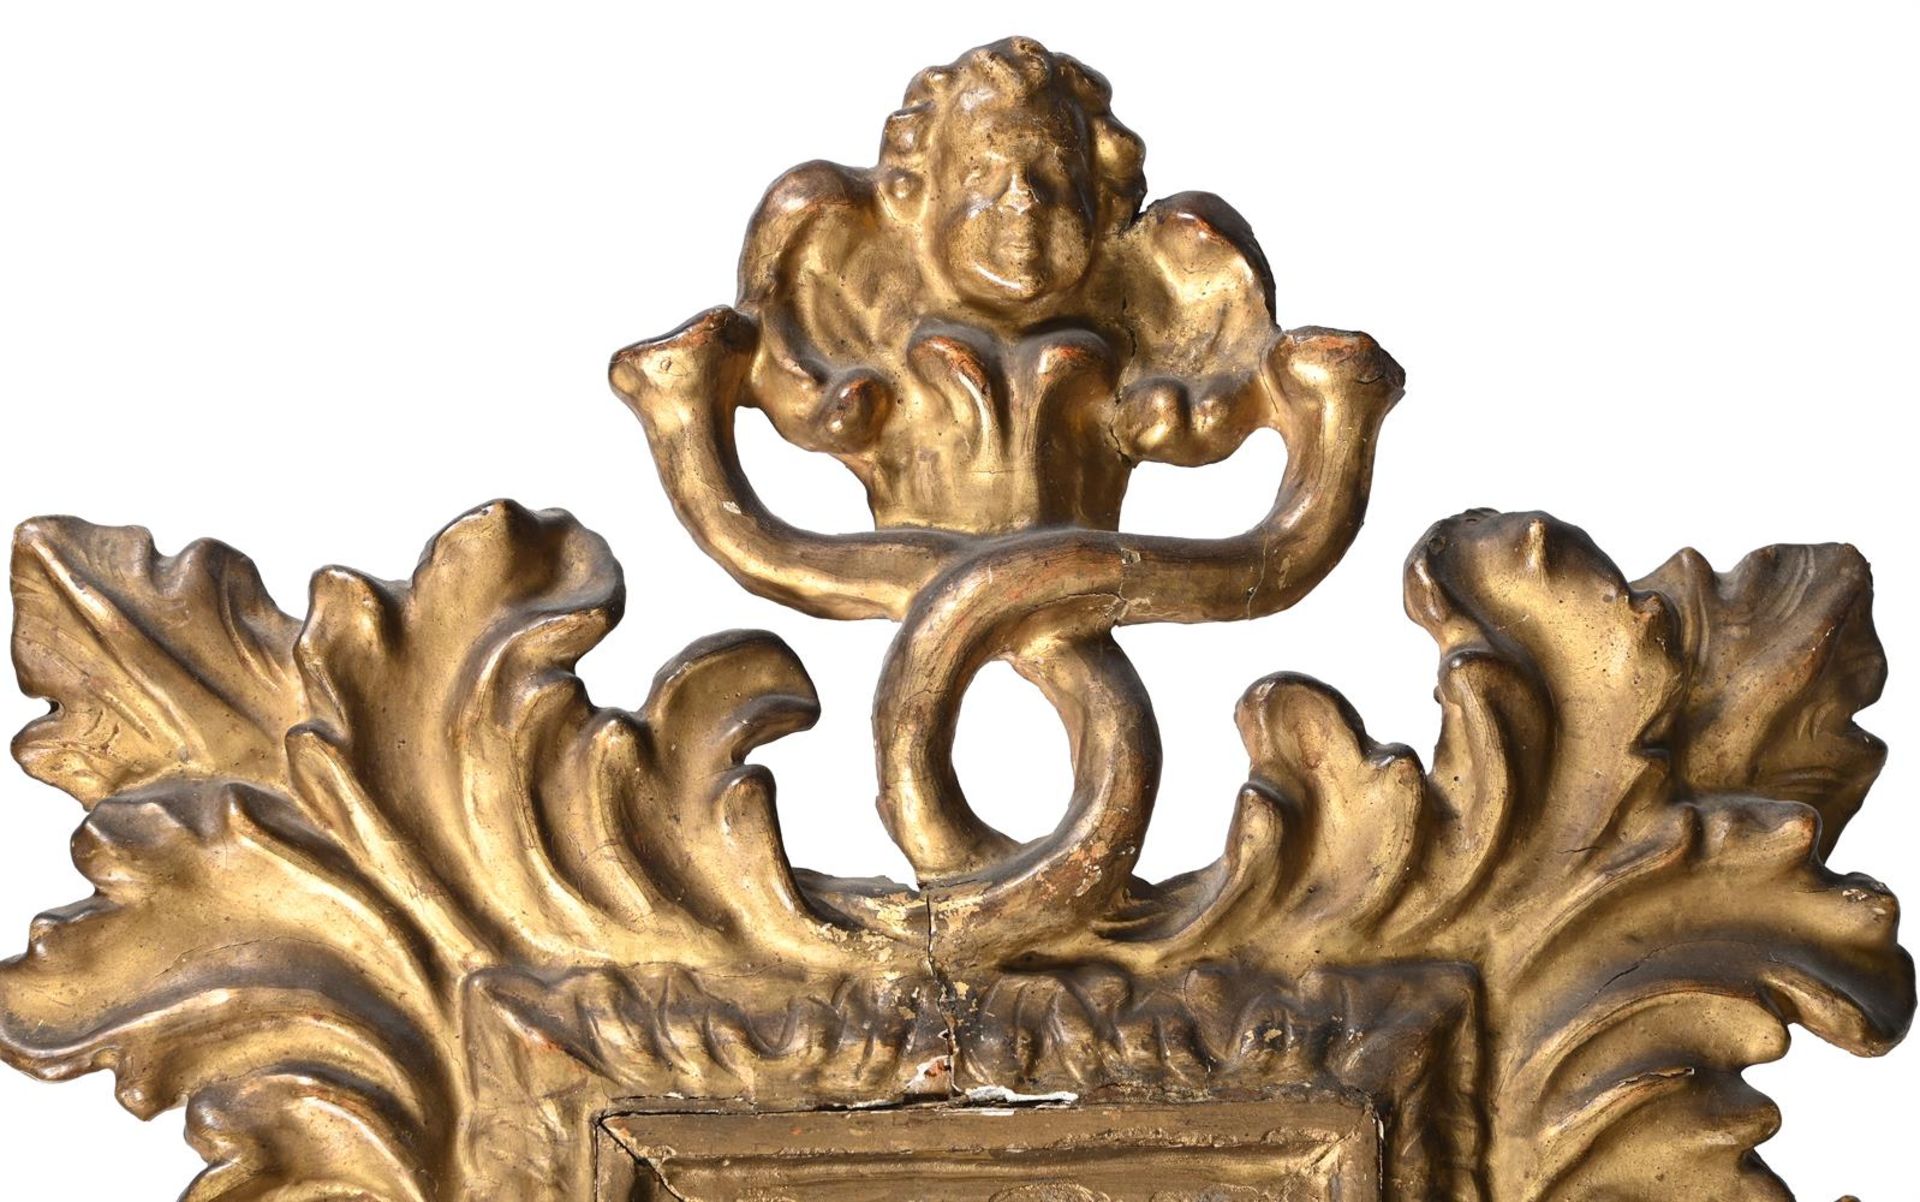 A SMALL ITALIAN CARVED GILTWOOD MIRROR, LATE 17TH/EARLY 18TH CENTURY - Image 2 of 4